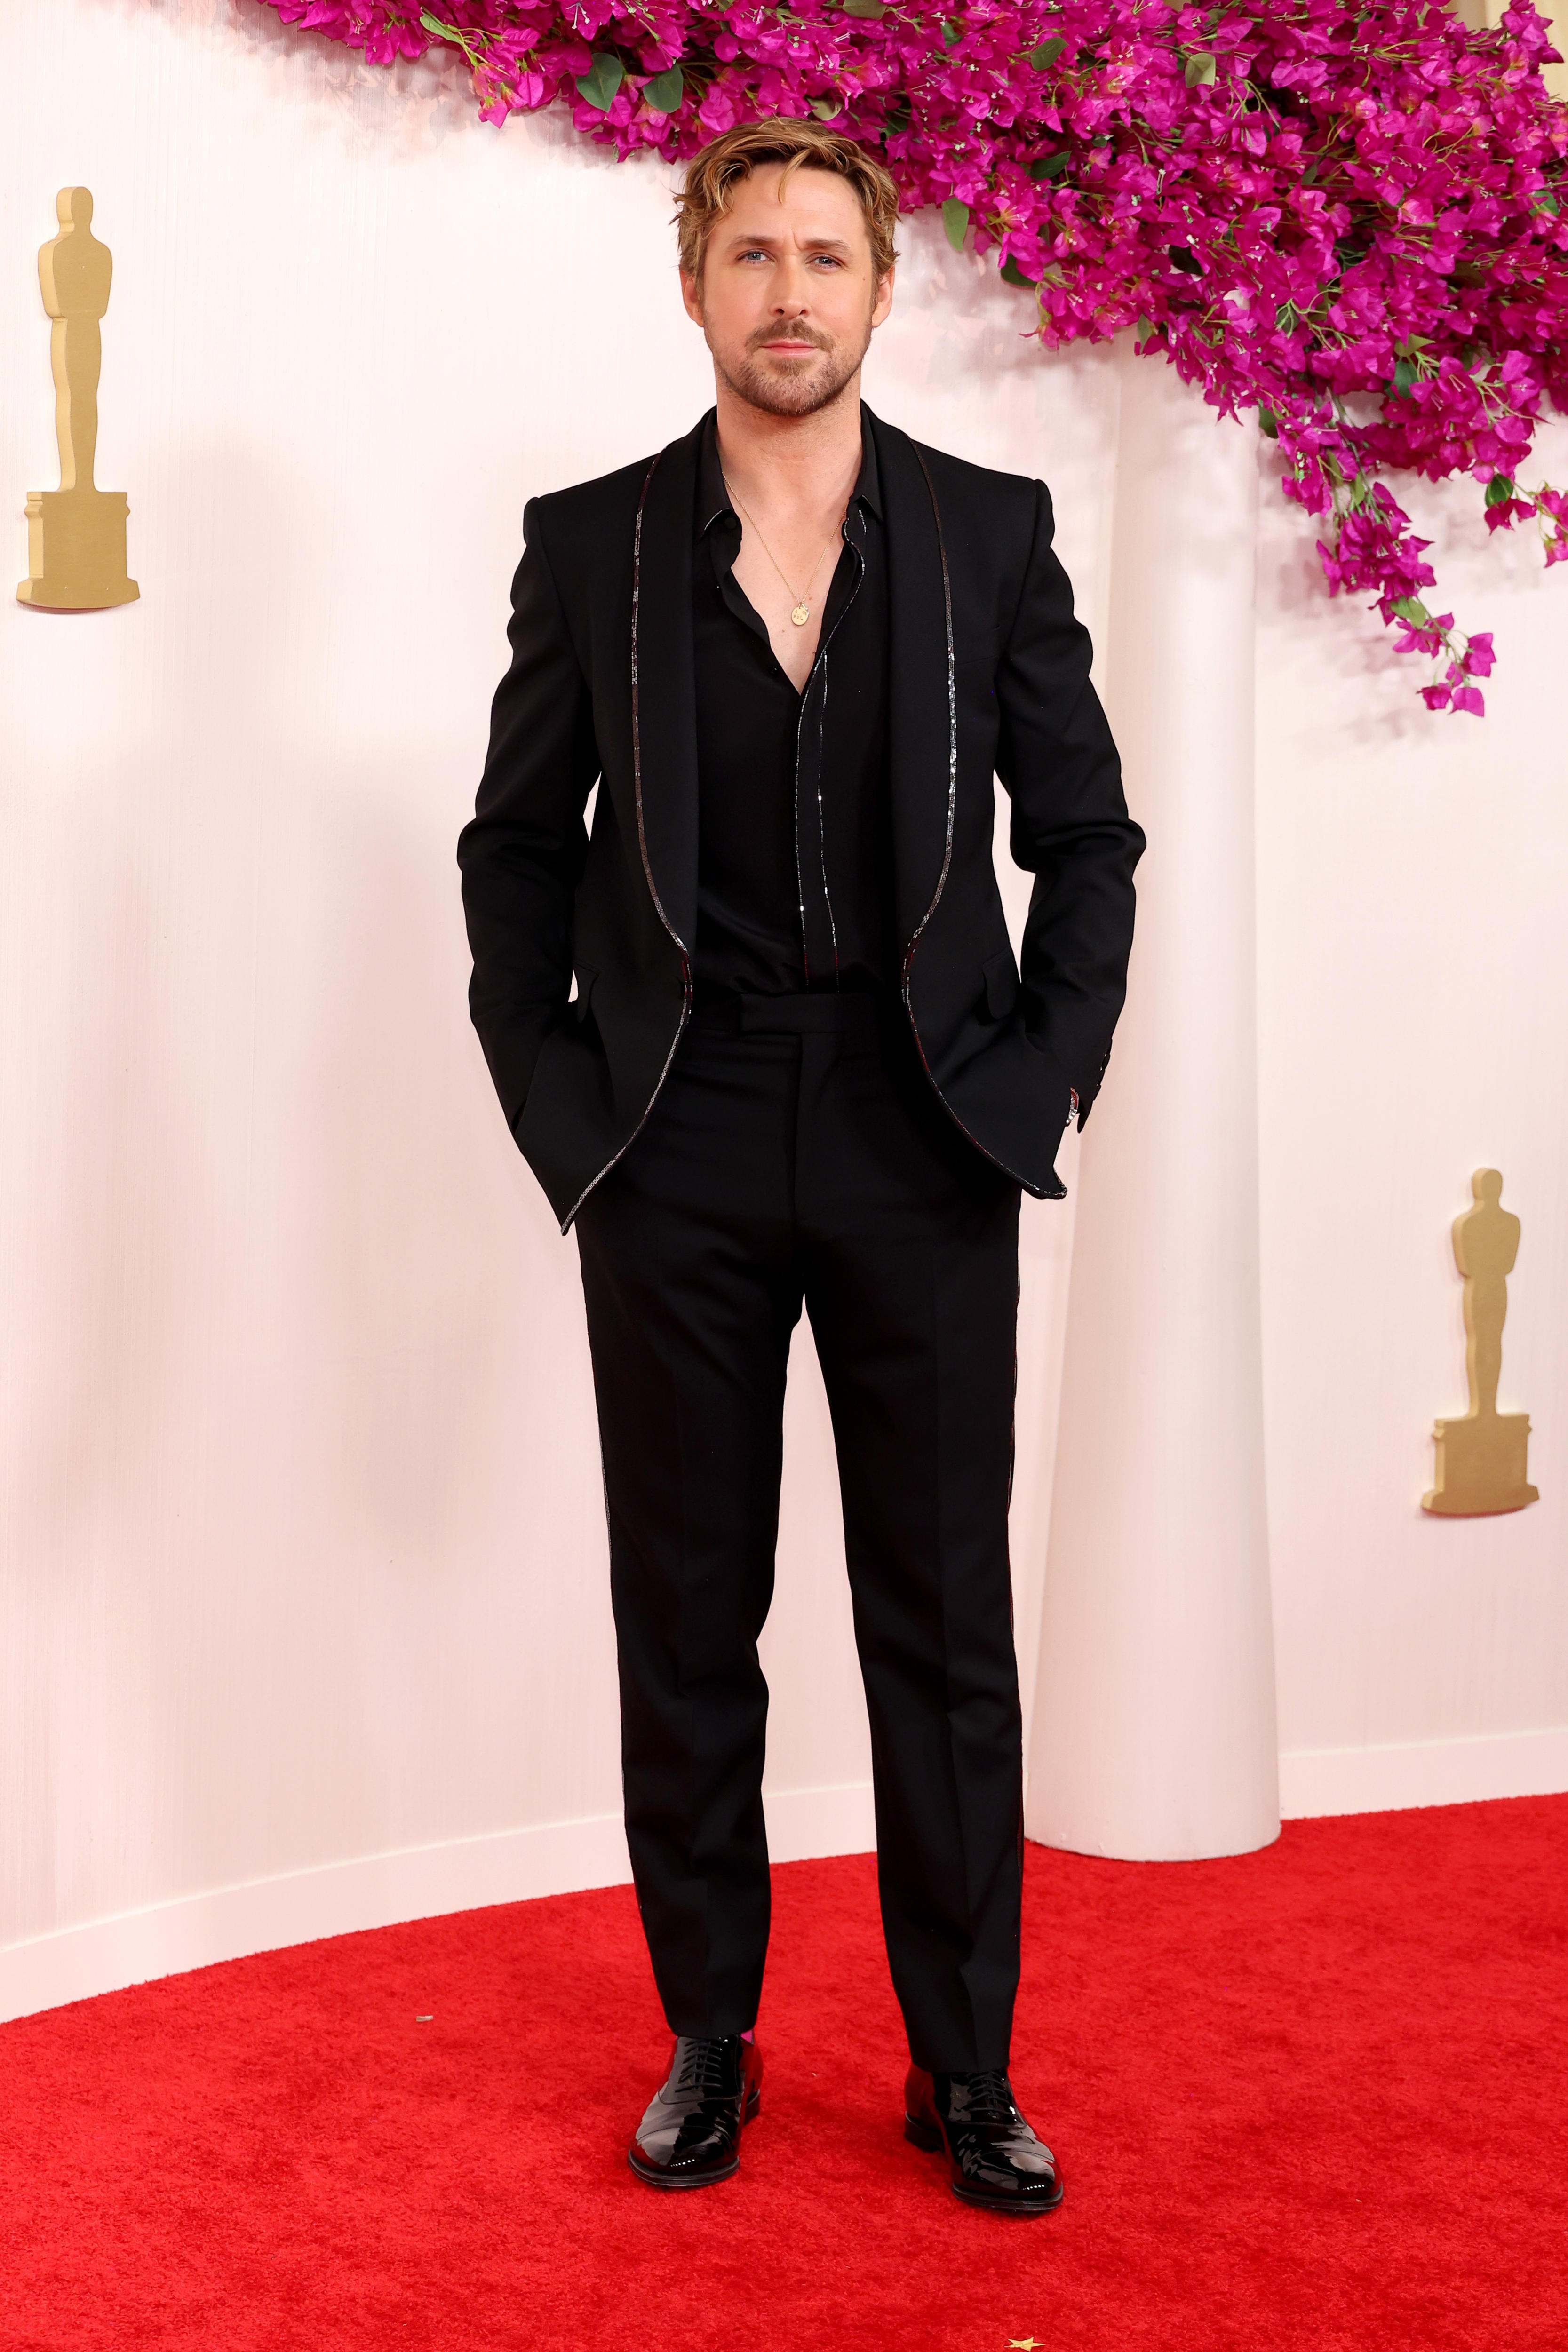 Ryan Gosling in a black suit on the Oscars red carpet